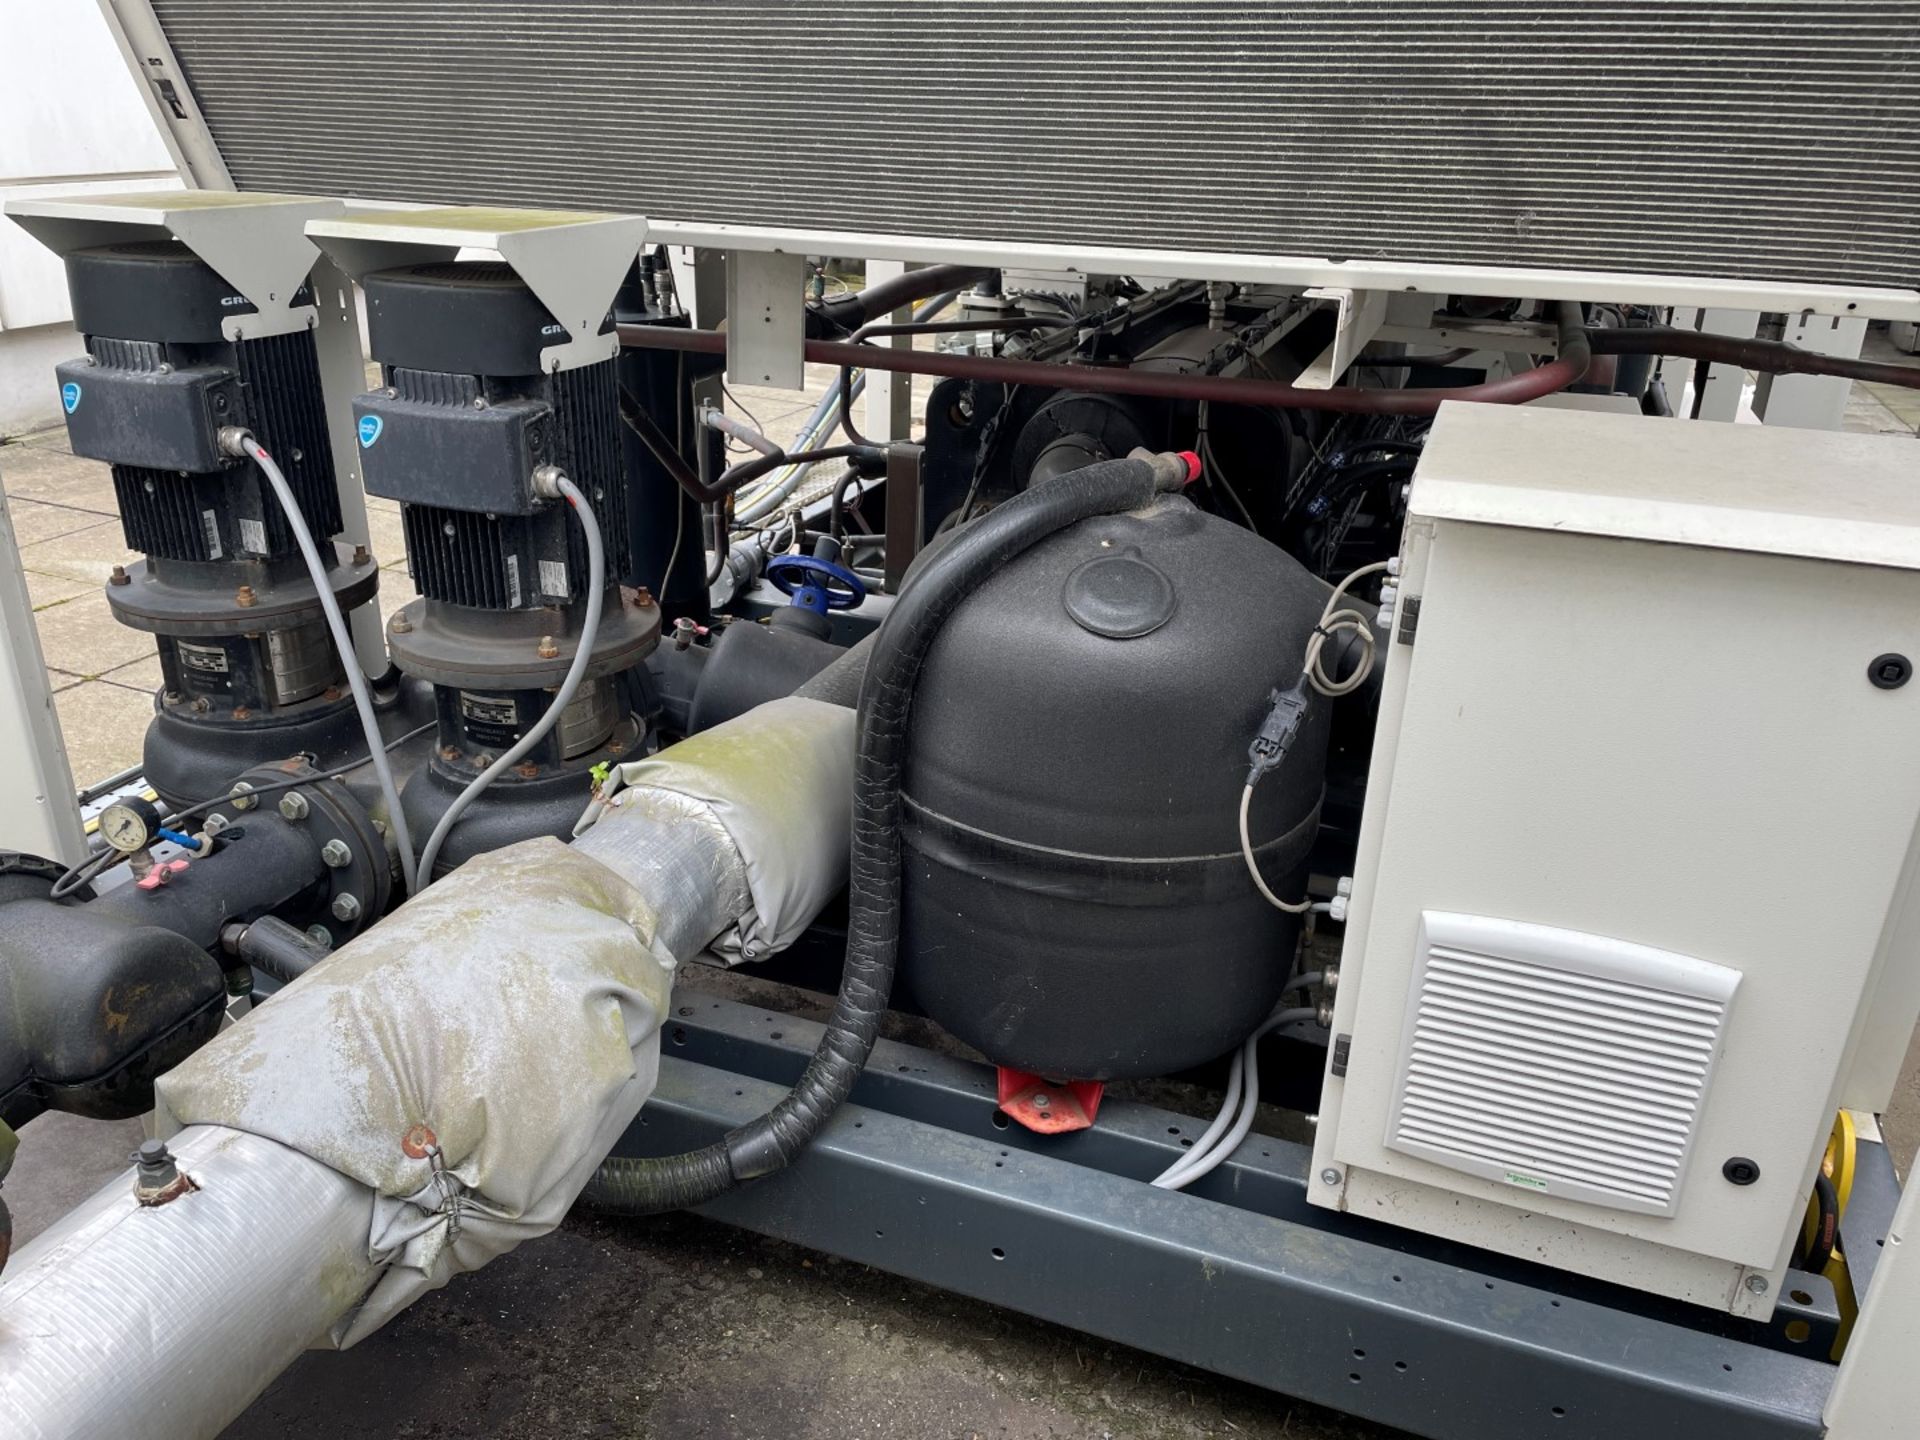 1 x TRANE/SINTESIS RTAF 105 Air-Cooled Screw Chiller - To Be Removed From An Executive Office - Image 42 of 105